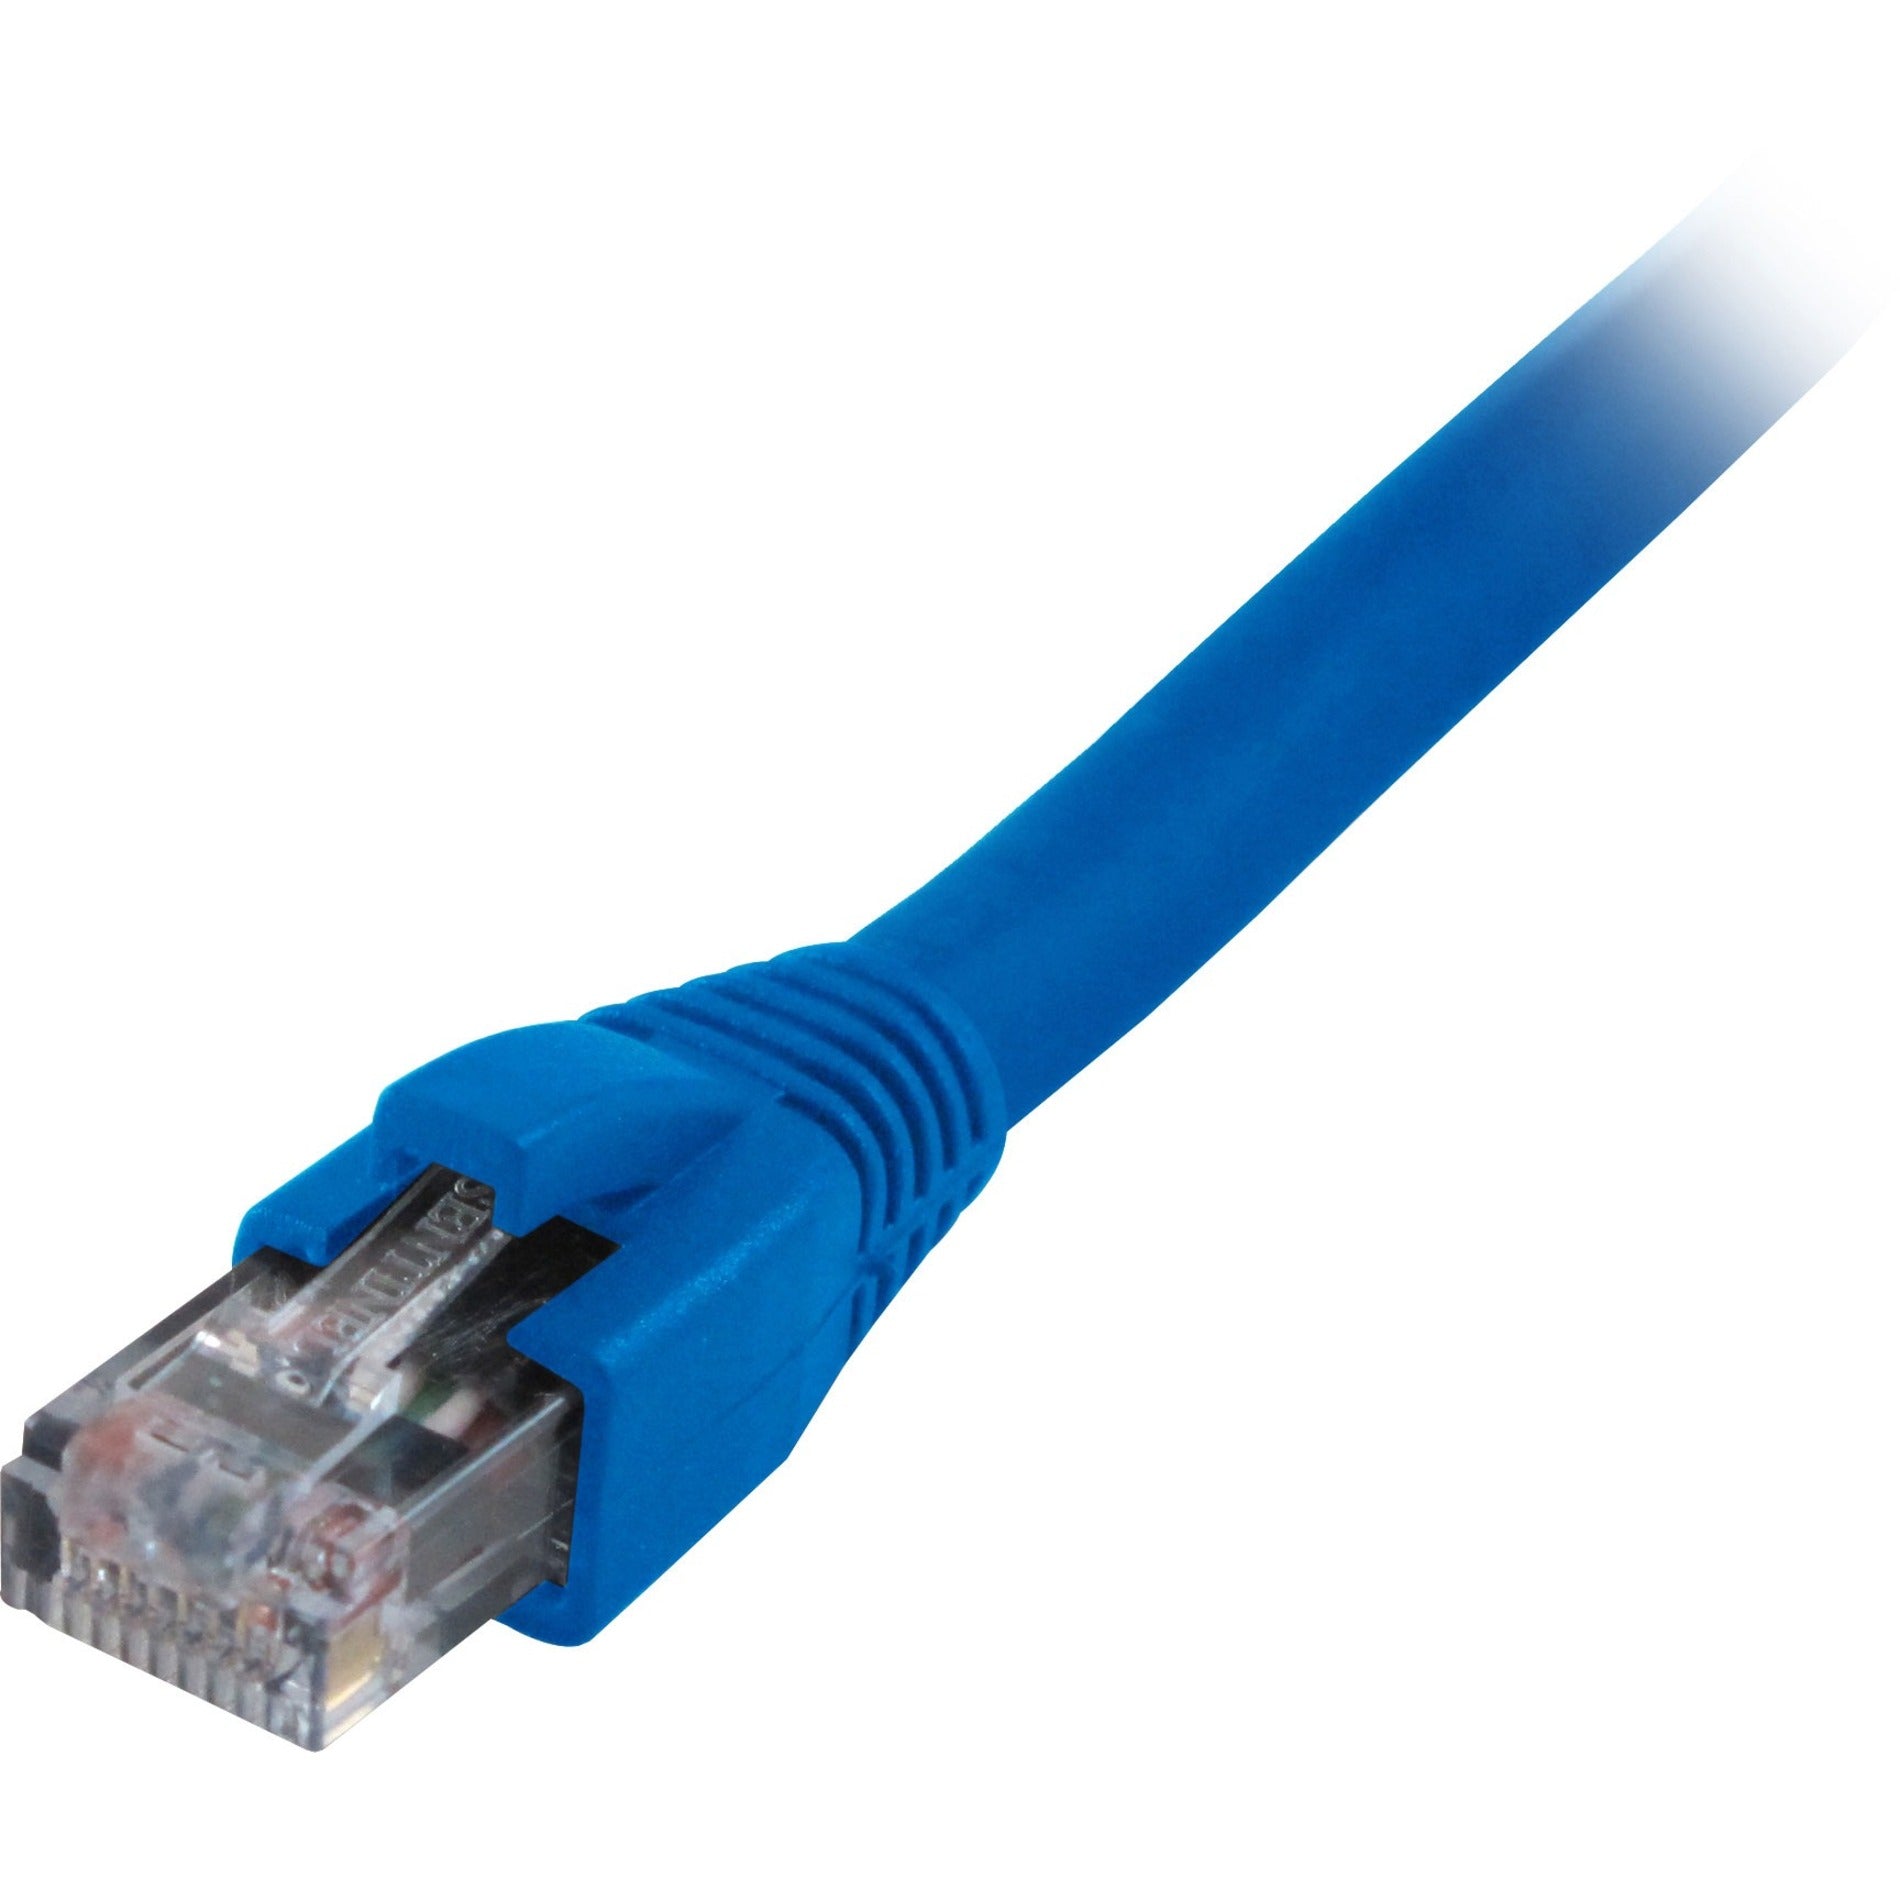 Comprehensive CAT6-25BLU-USA Cat6 Snagless Patch Cable 25ft Blue - USA Made & TAA Compliant, Lifetime Warranty